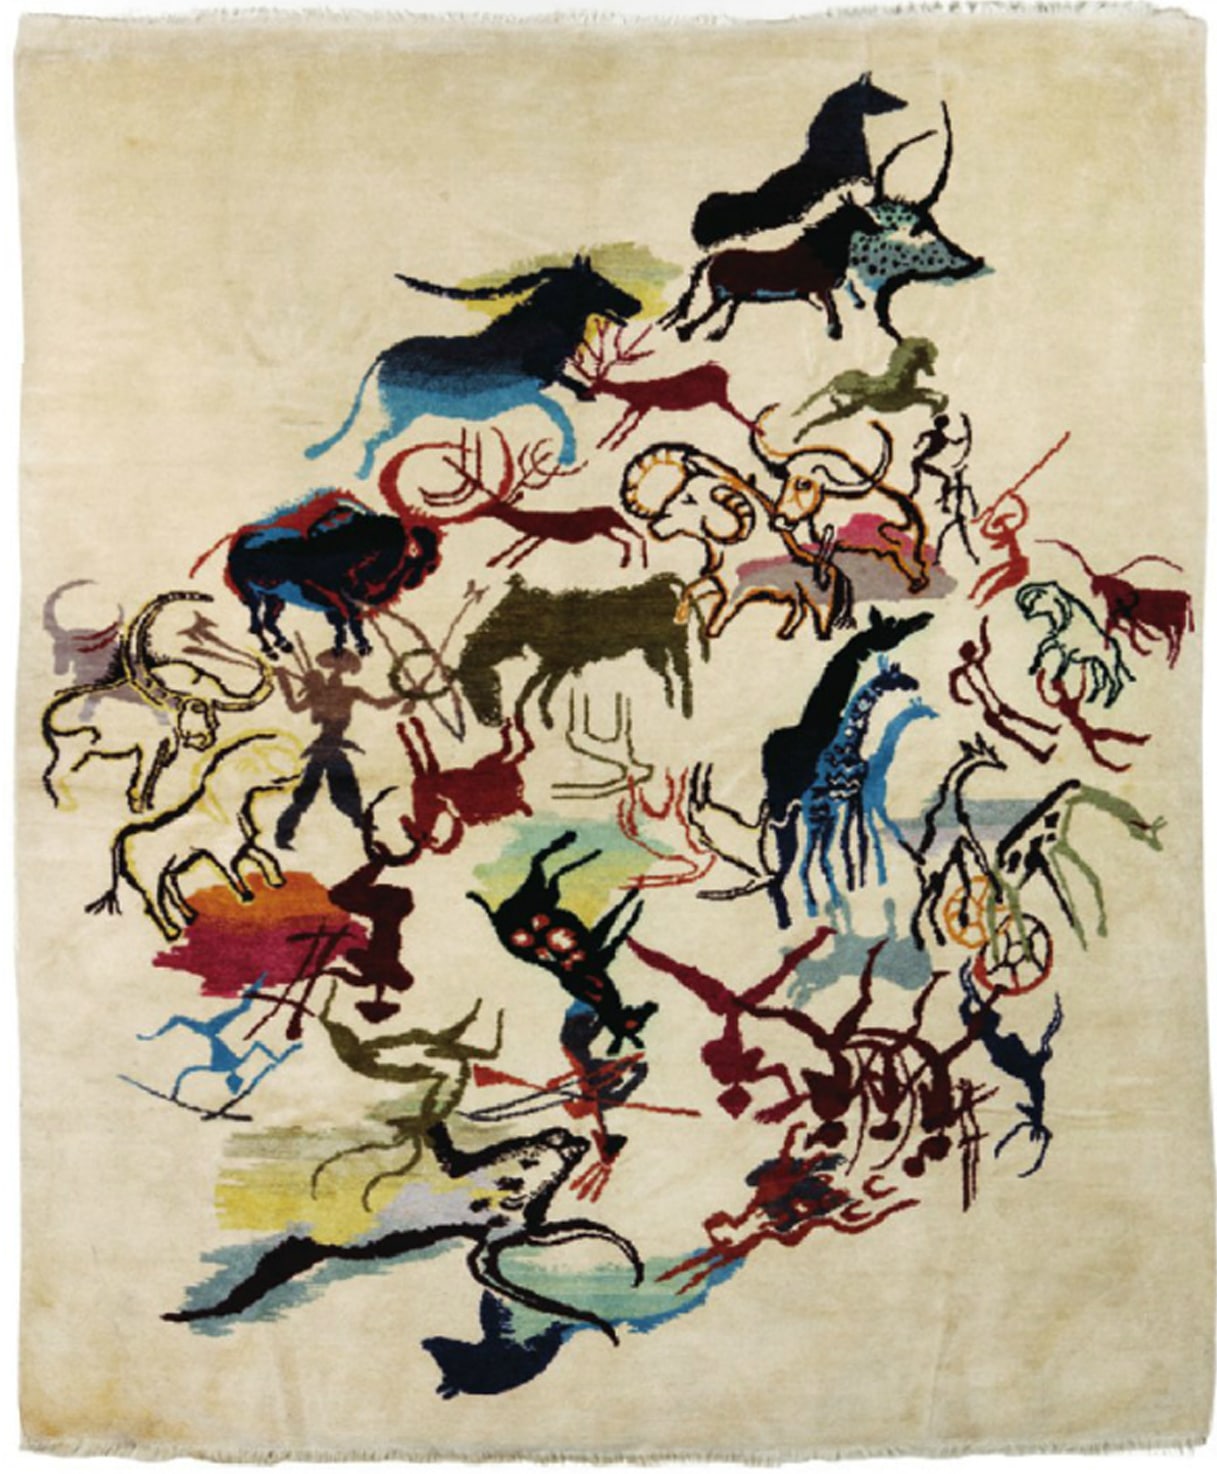 Olga Fisch, Lascaux Cave inspired, 1950s wool rug